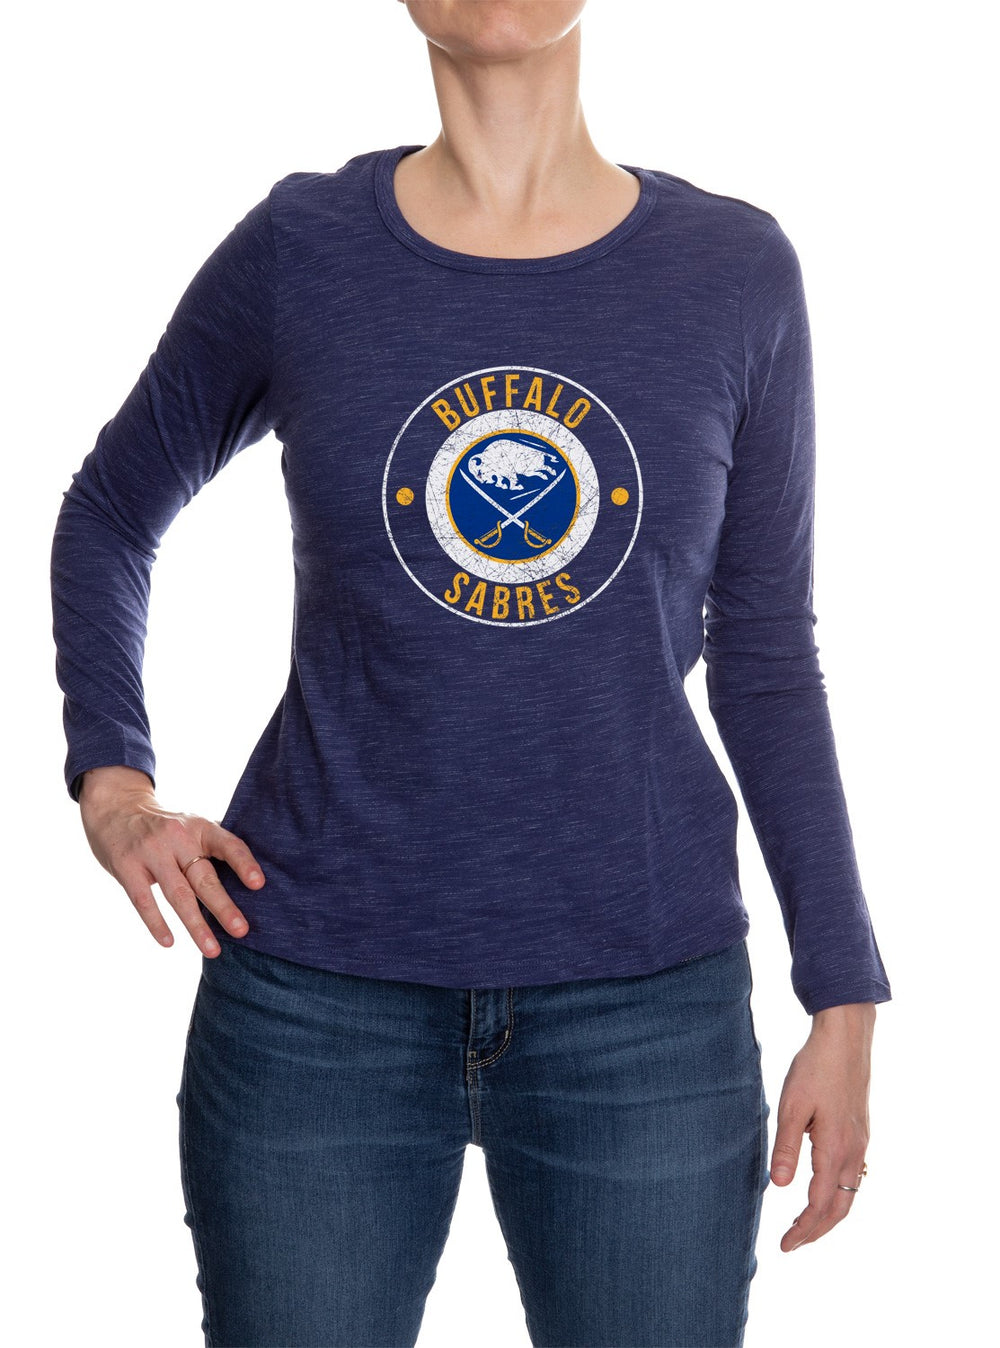 Buffalo Sabres Distressed Logo Long Sleeve Shirt for Women in Blue Front View